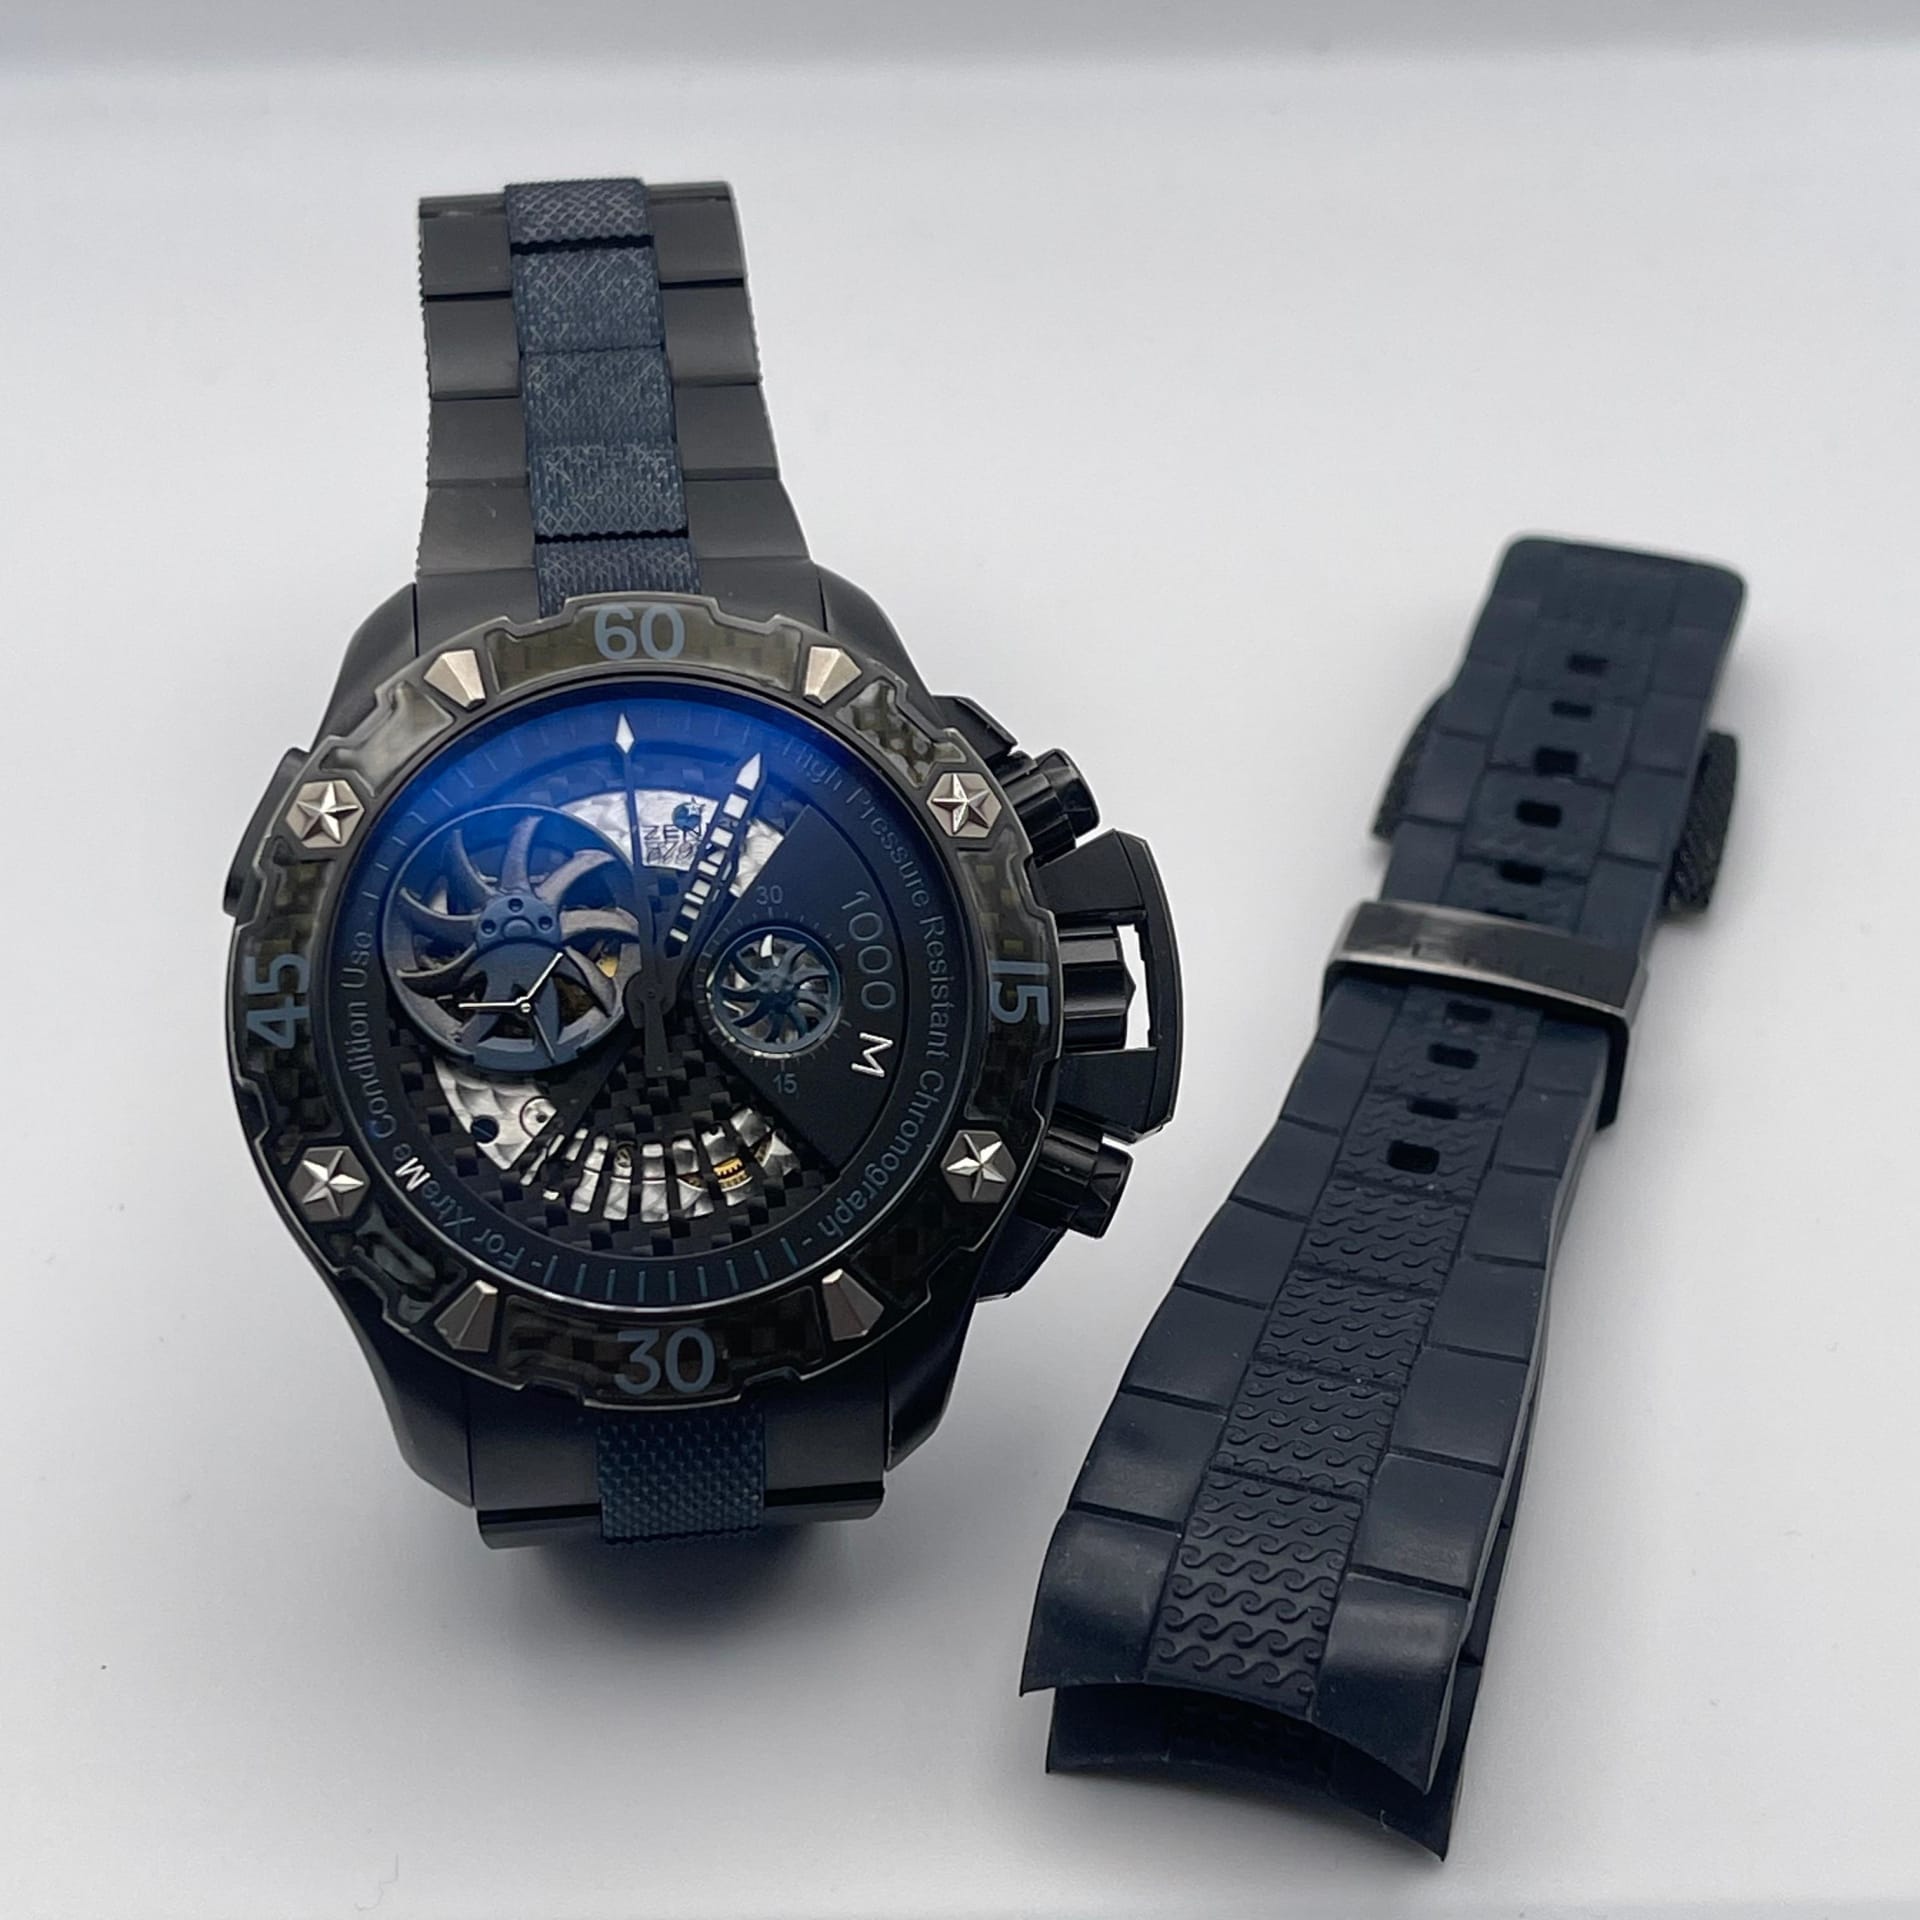 ZENITH Defy Xtreme Open Sea El Primero Reference 96.0529.4021/51.M533, A  Black And Blue Titanium Chronograph With Carbon Fiber Bezel And Open-worked  Dial, Circa 2000 Available For Immediate Sale At Sotheby's